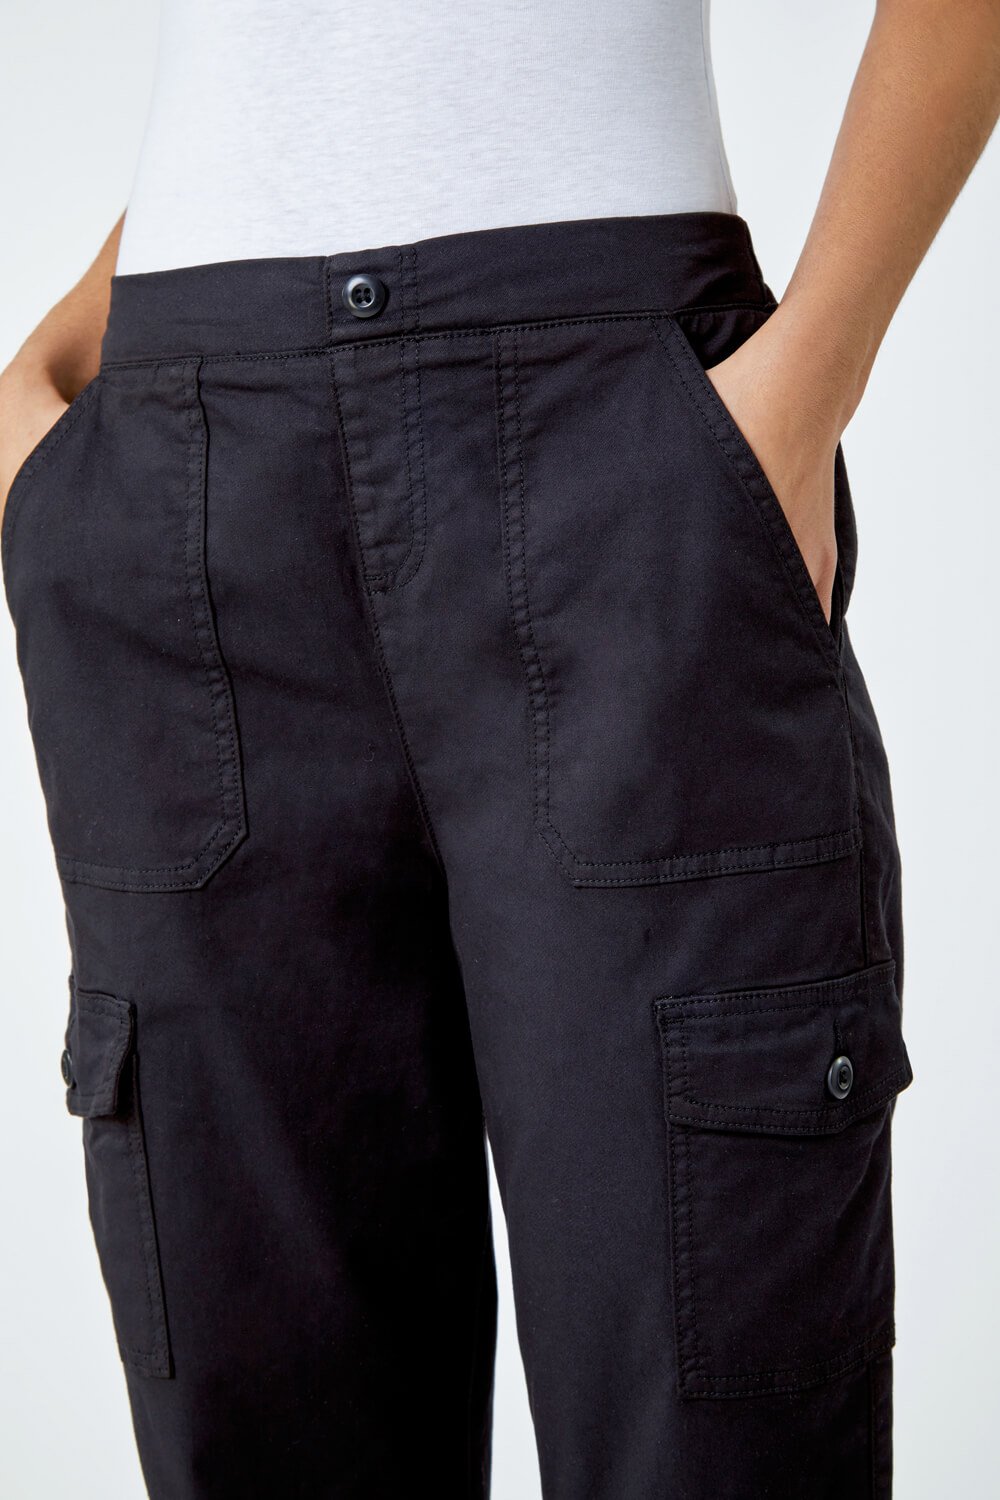 Black Casual Cargo Stretch Trousers, Image 5 of 5